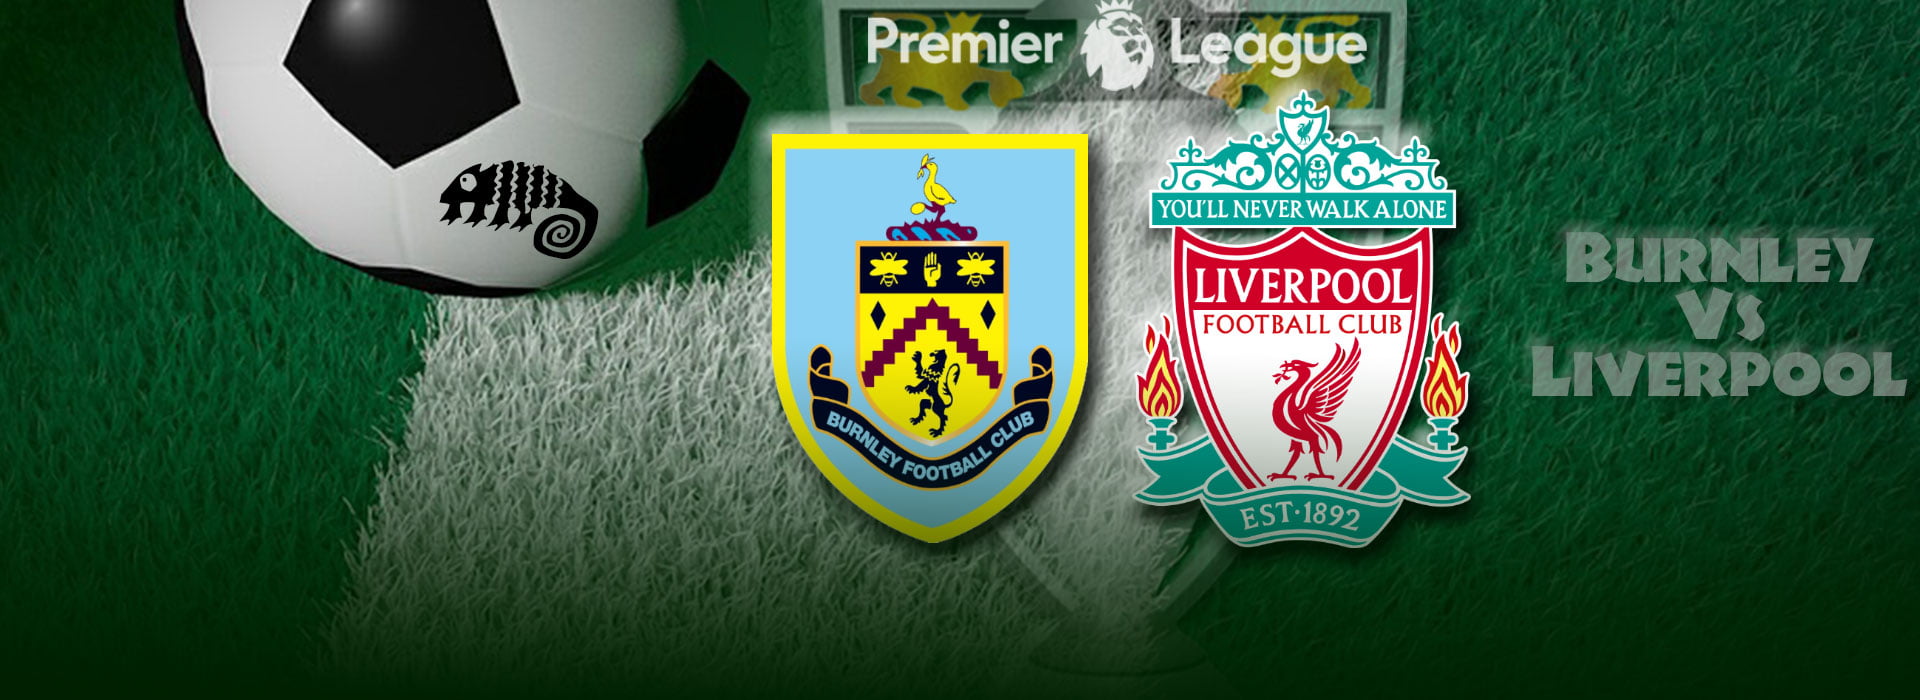 Burnley v Liverpool – will they keep their perfect record? Premier League Match Predictions & Betting Tips